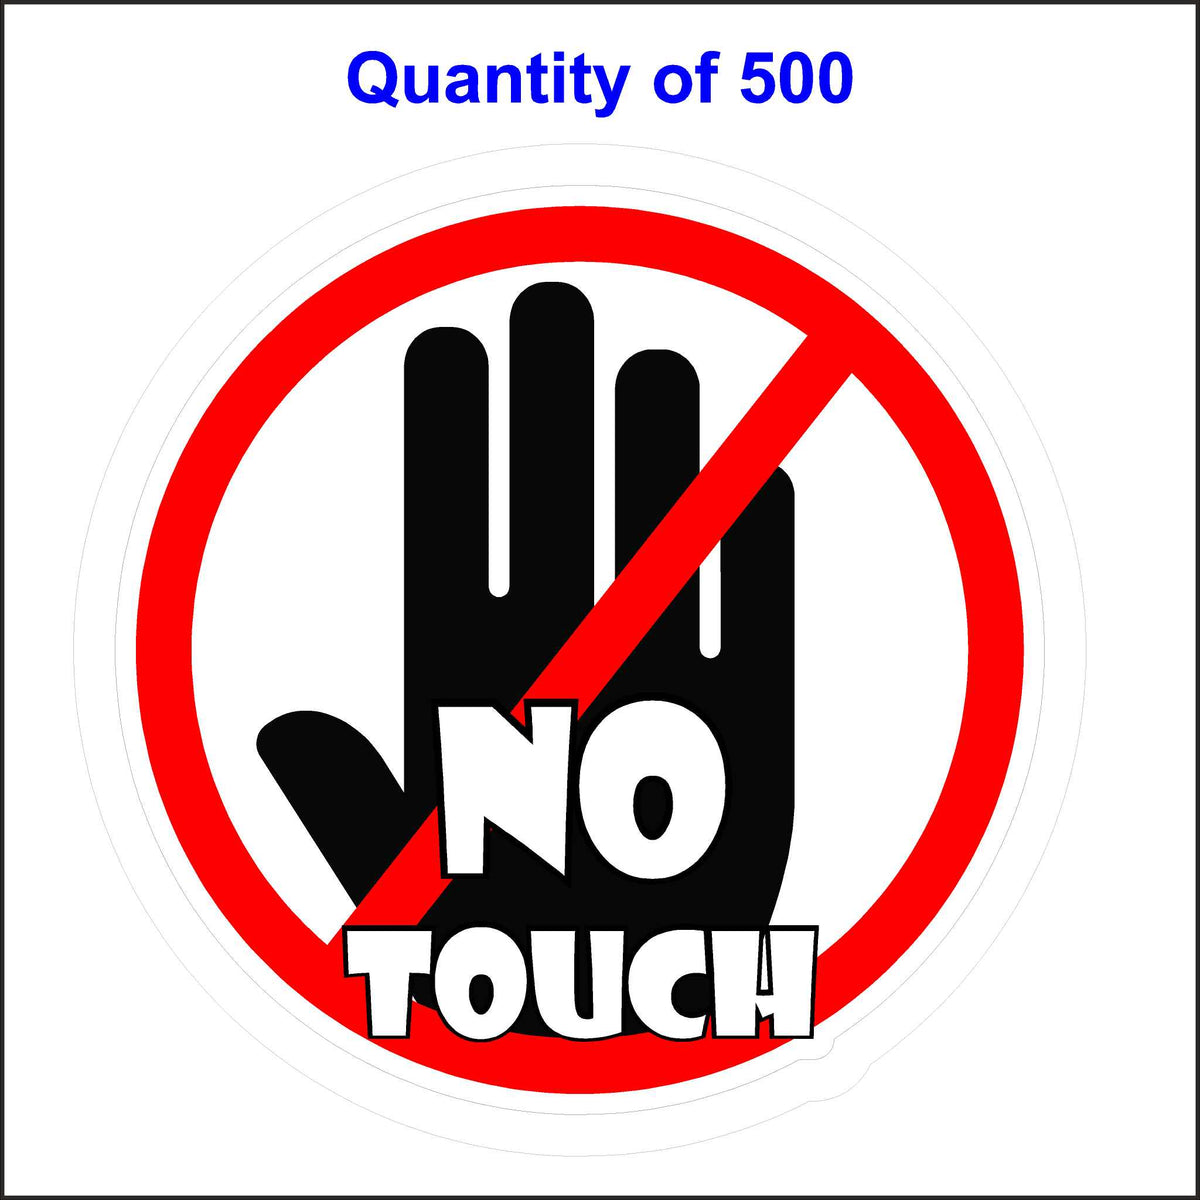 STOP No Touch Sticker. 500 Quantity.